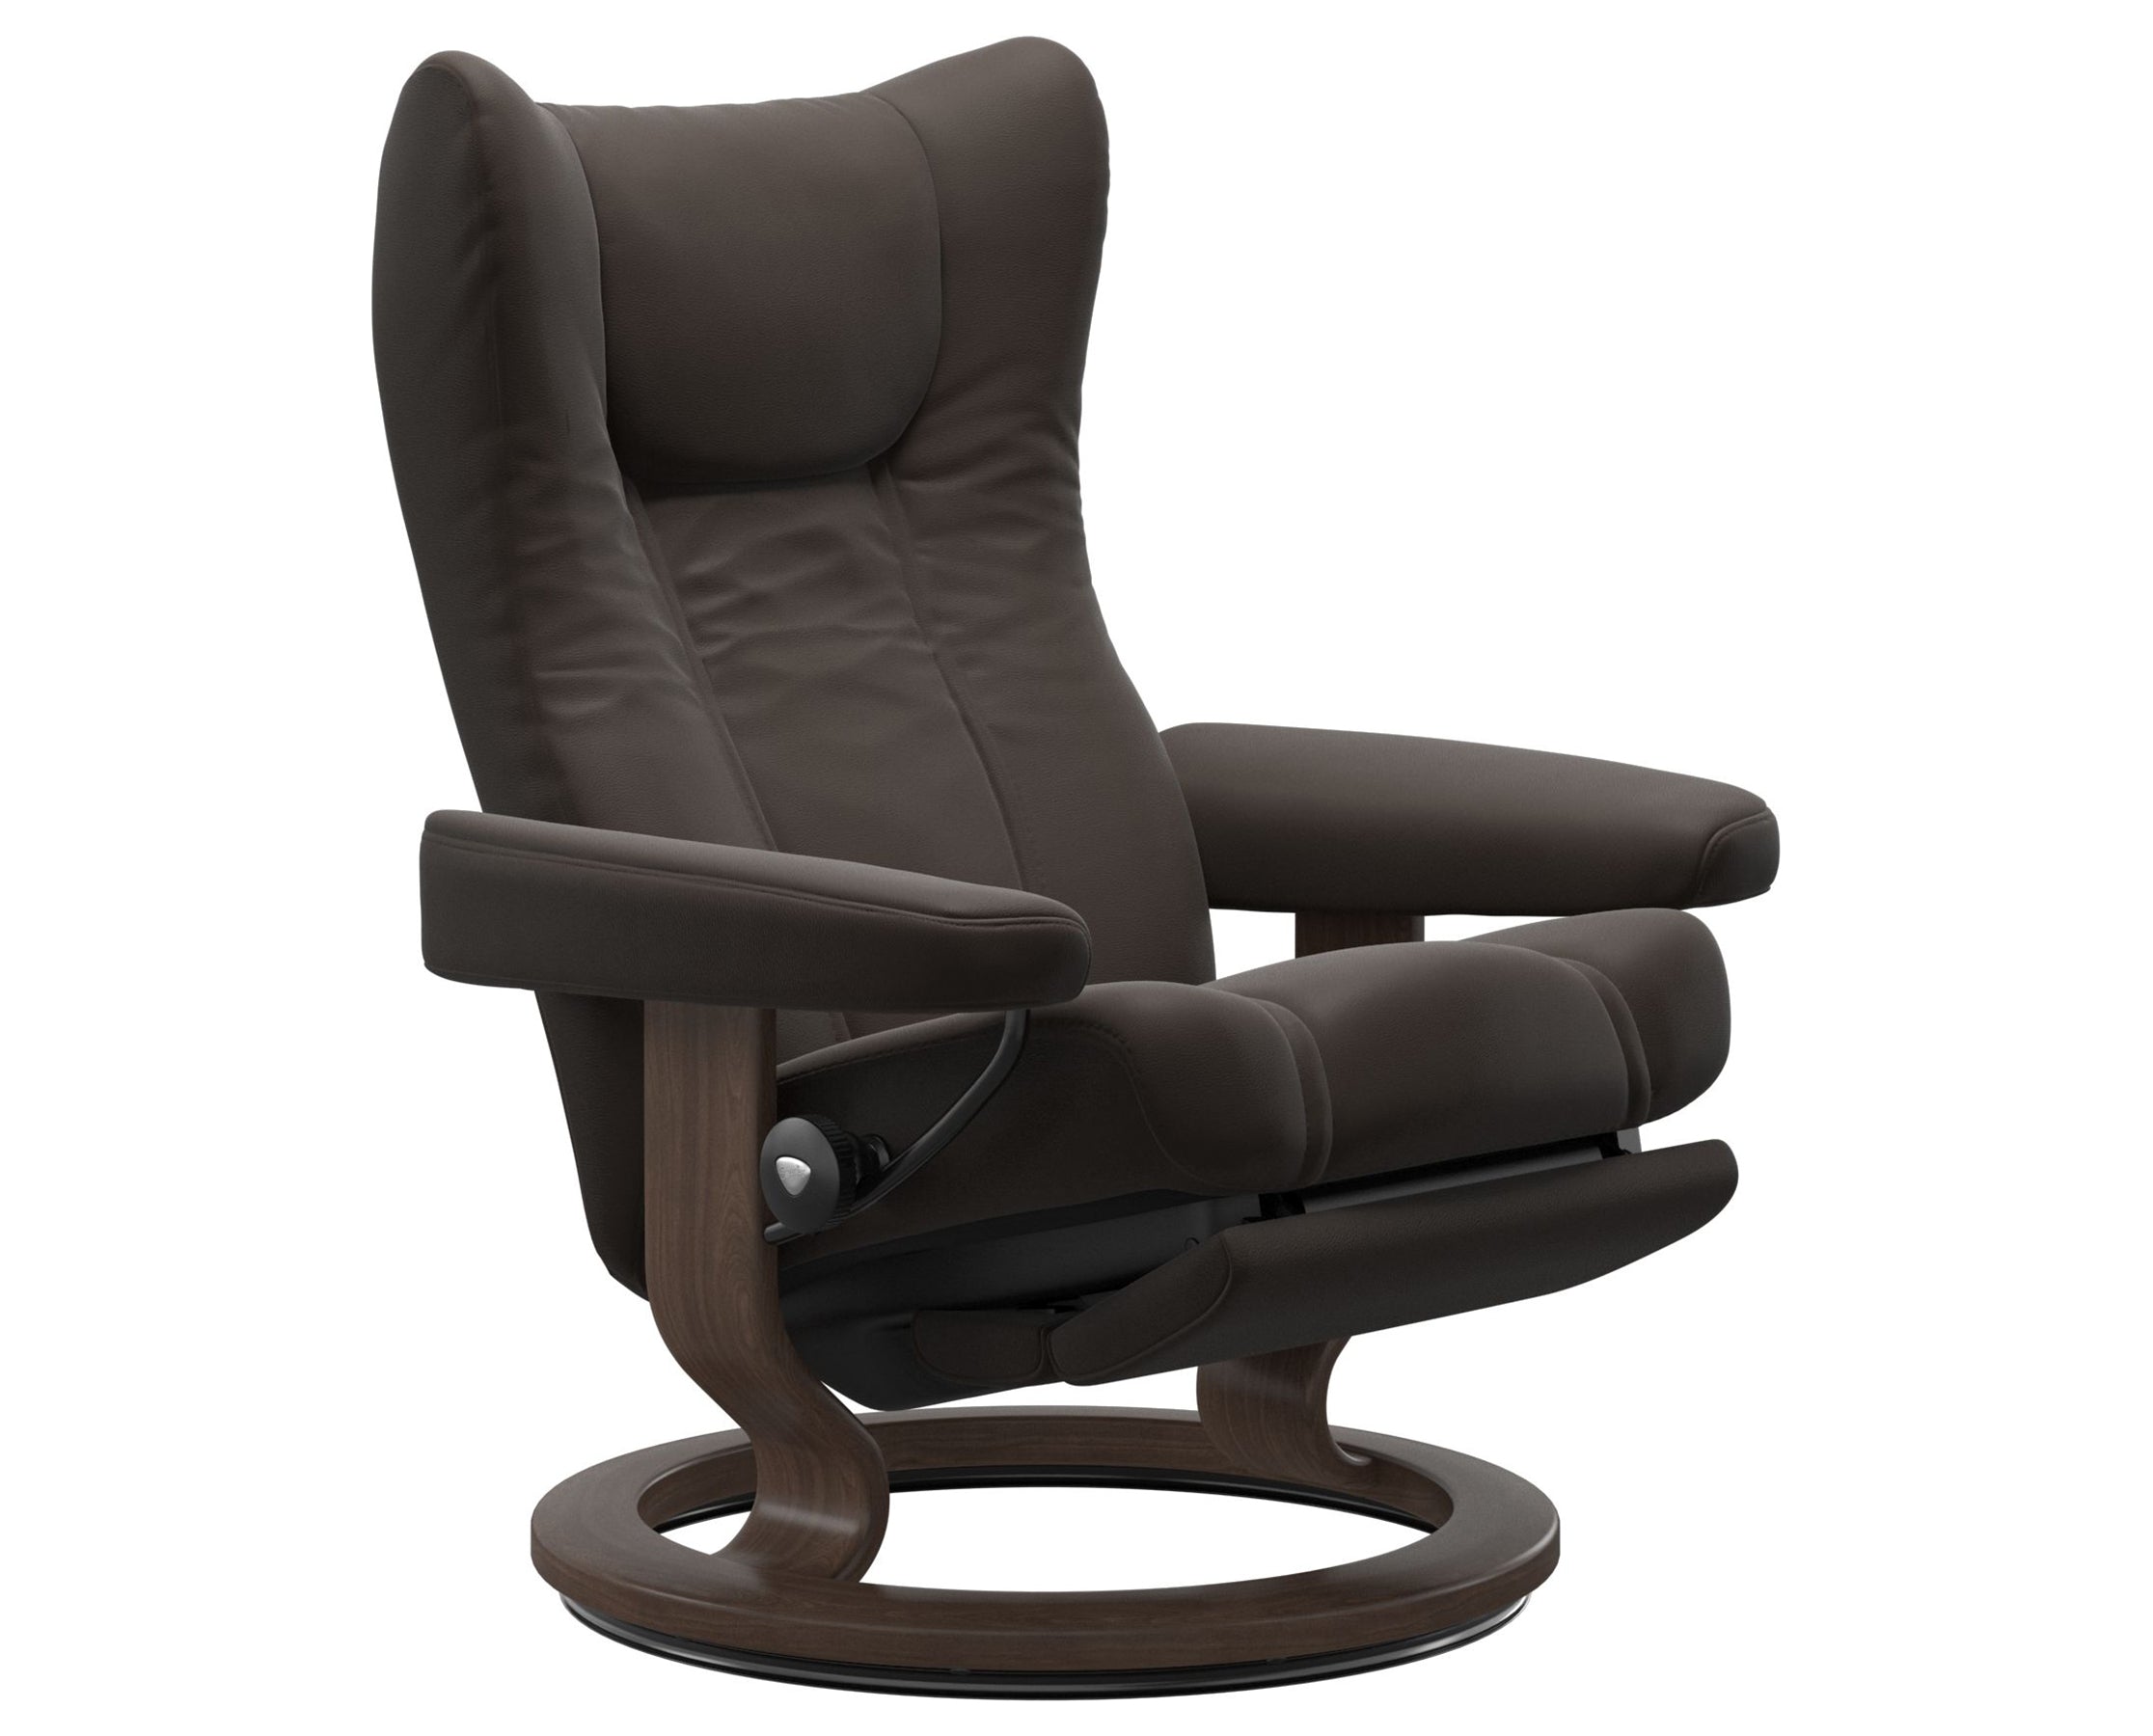 Paloma Leather Chestnut M/L & Walnut Base | Stressless Wing Classic Power Recliner | Valley Ridge Furniture